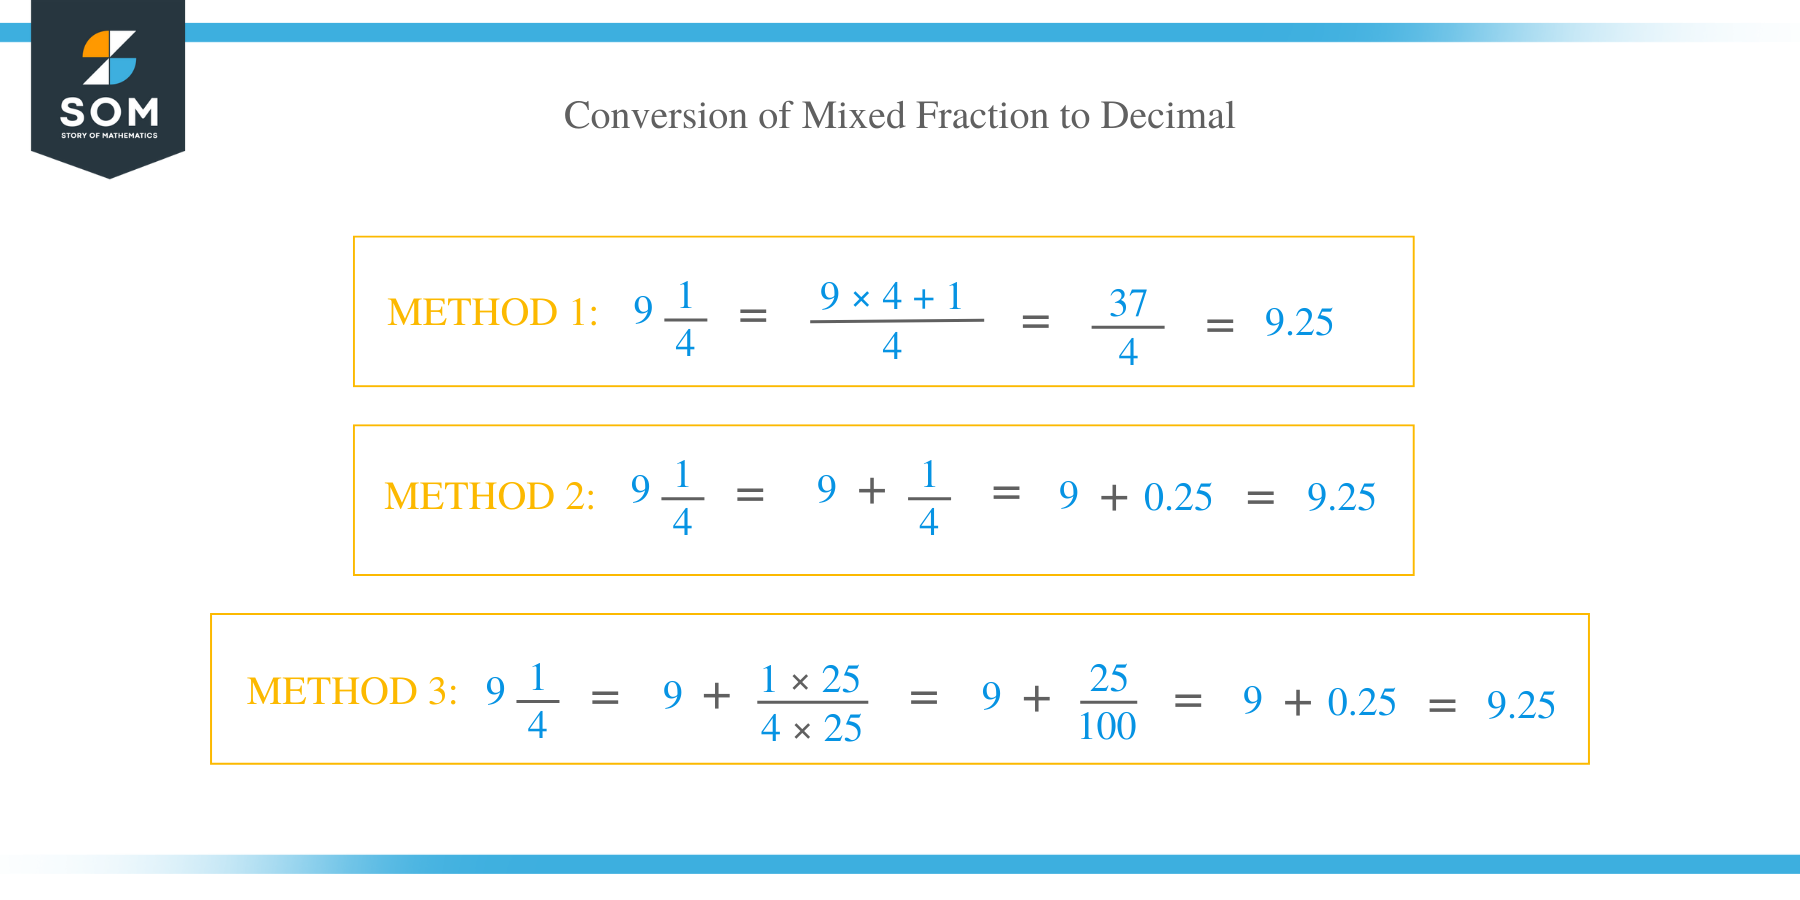 Conversion of Mixed Fraction to Decimal